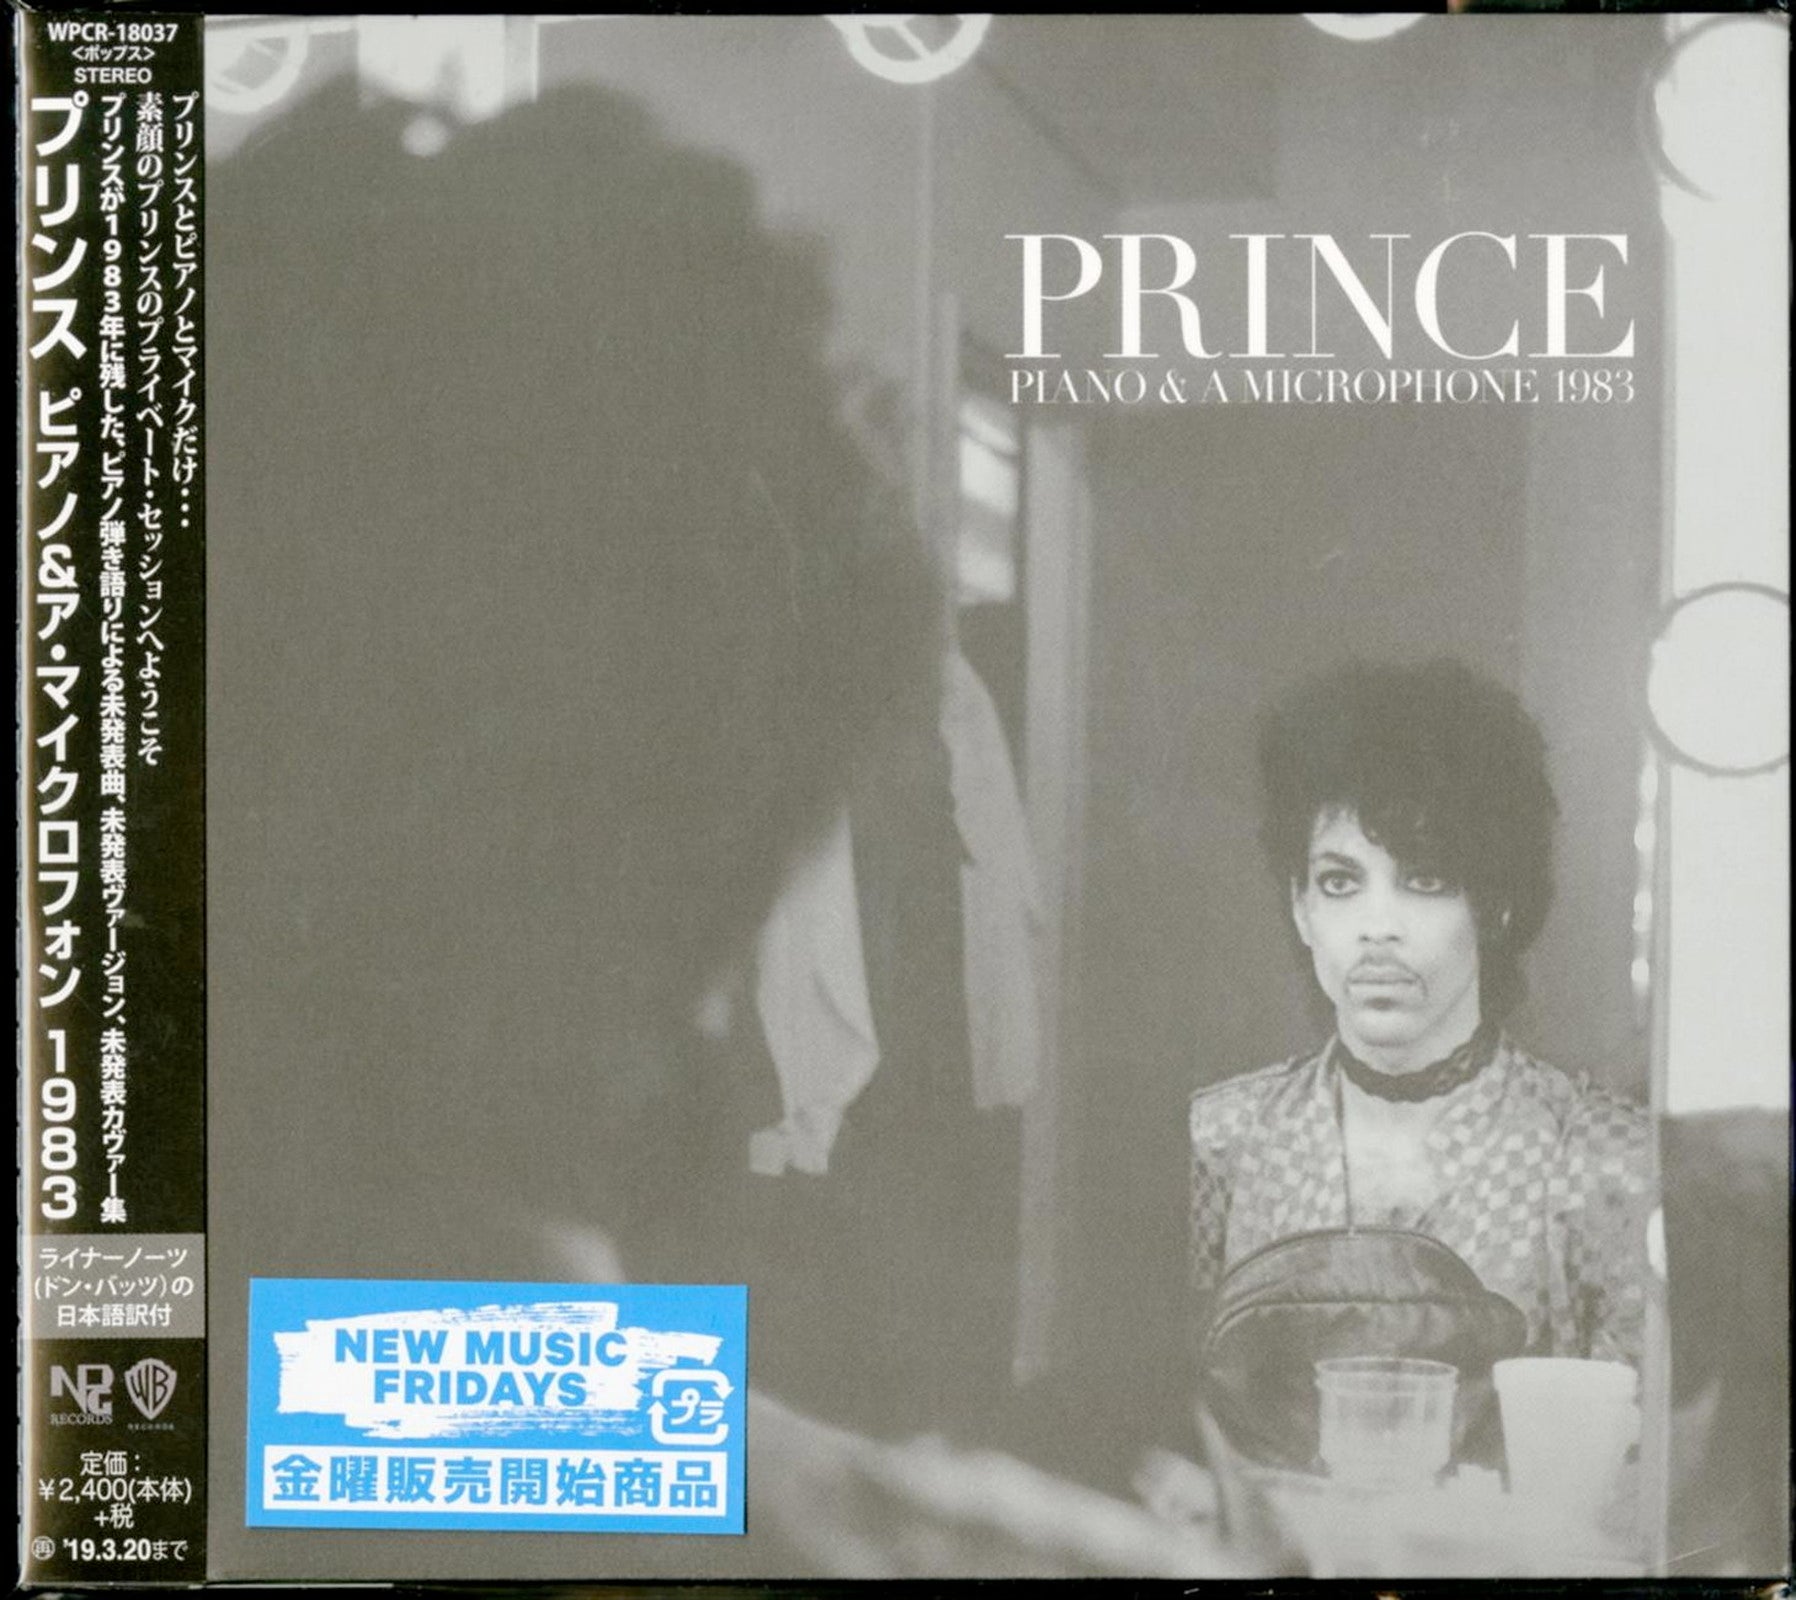 Prince - Piano & A Microphone 1983 - Import CD – CDs Vinyl Japan Store